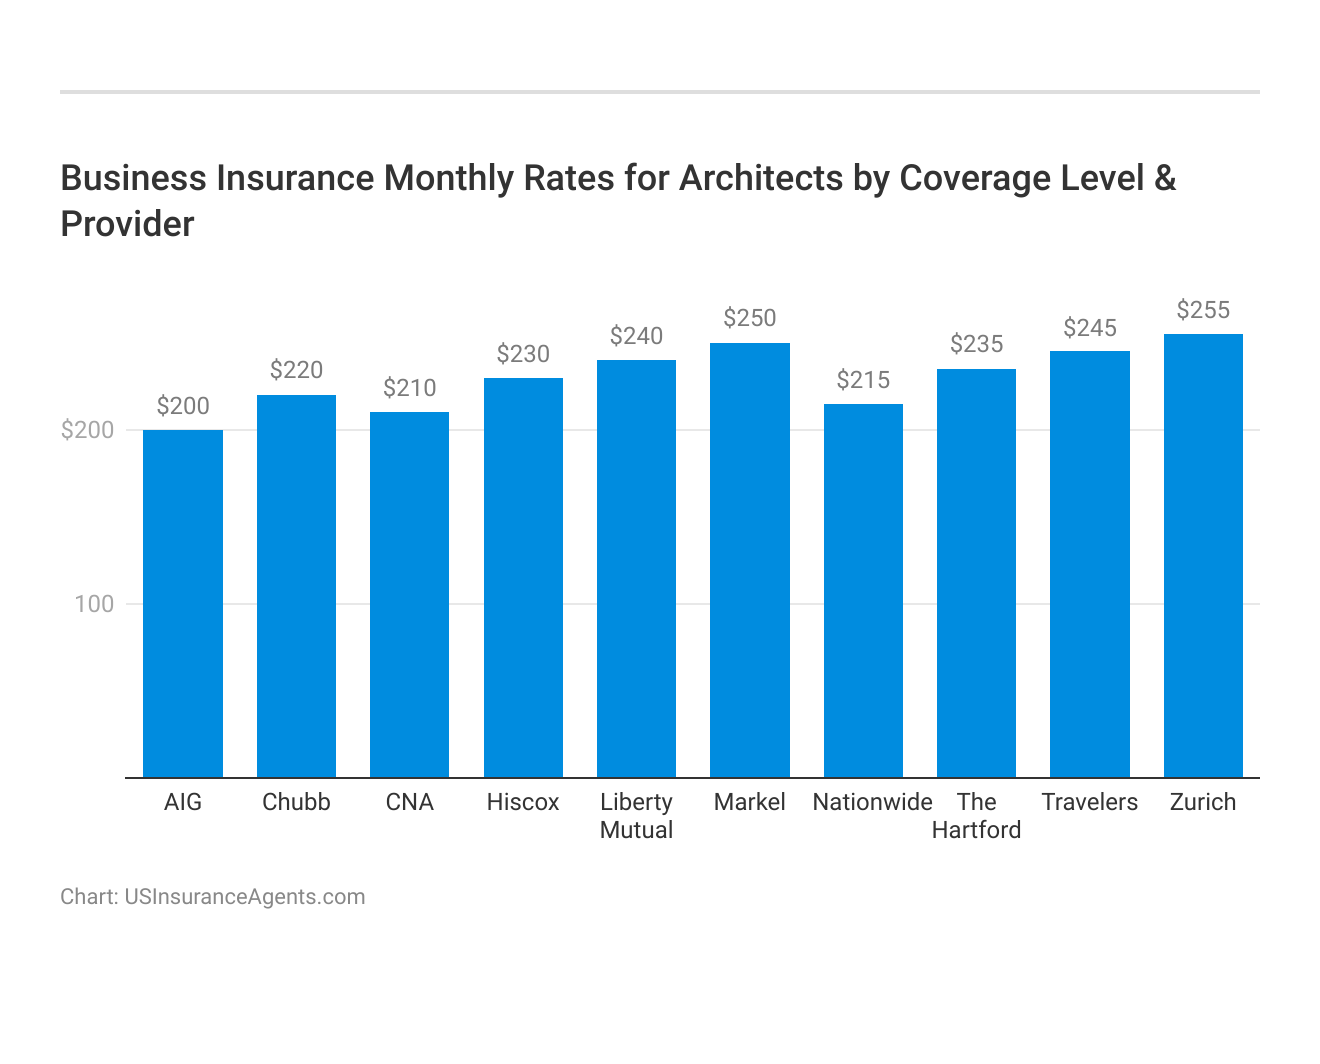 <h3>Business Insurance Monthly Rates for Architects by Coverage Level & Provider</h3>